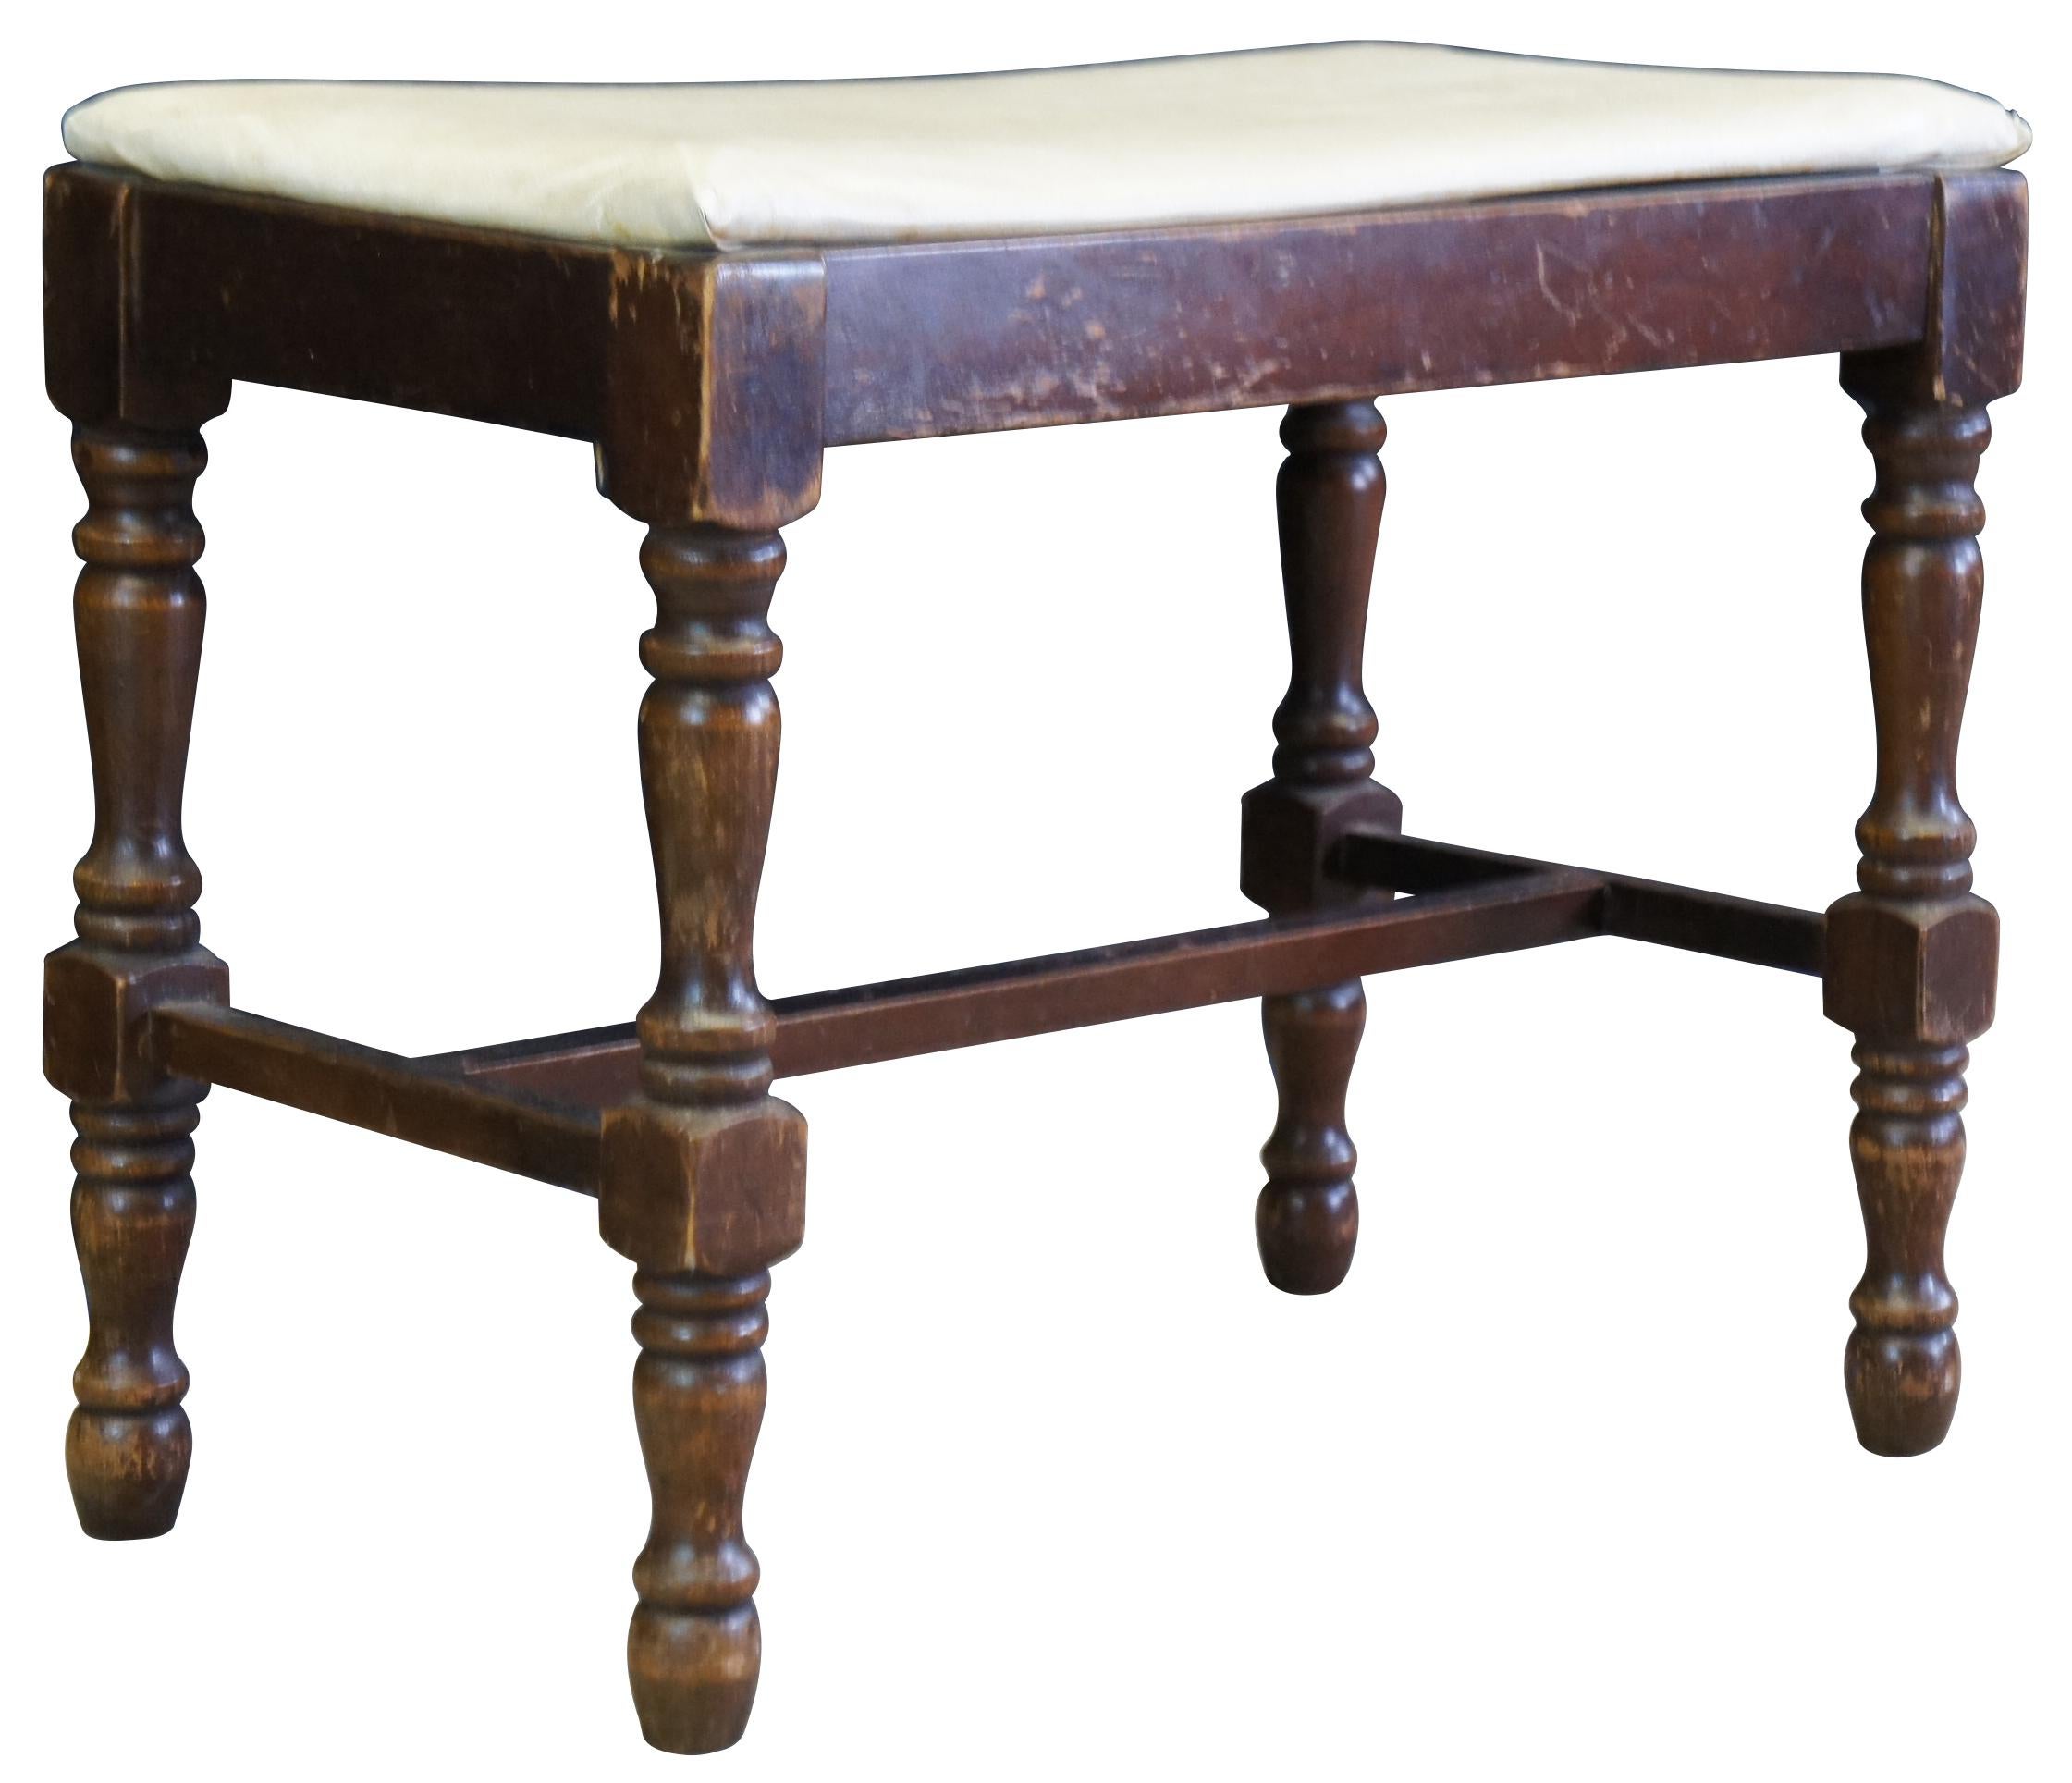 William and Mary bench or foot rest, circa first half 20th century. Made of walnut featuring turned legs connected with H strecher and upholstered seat. Measure: 22